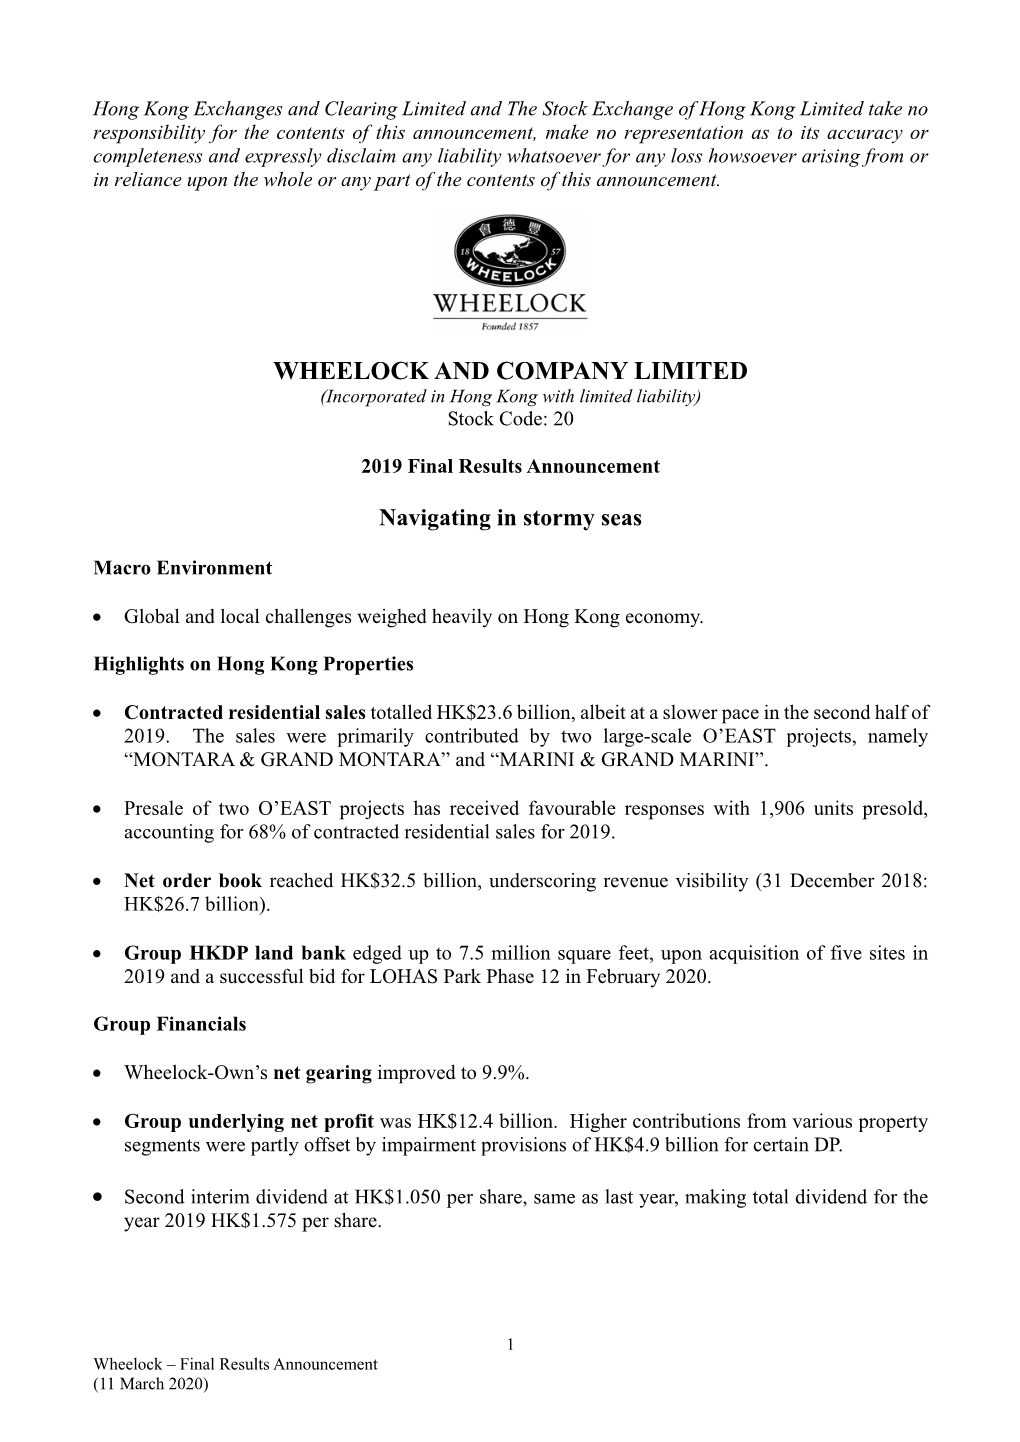 WHEELOCK and COMPANY LIMITED (Incorporated in Hong Kong with Limited Liability) Stock Code: 20